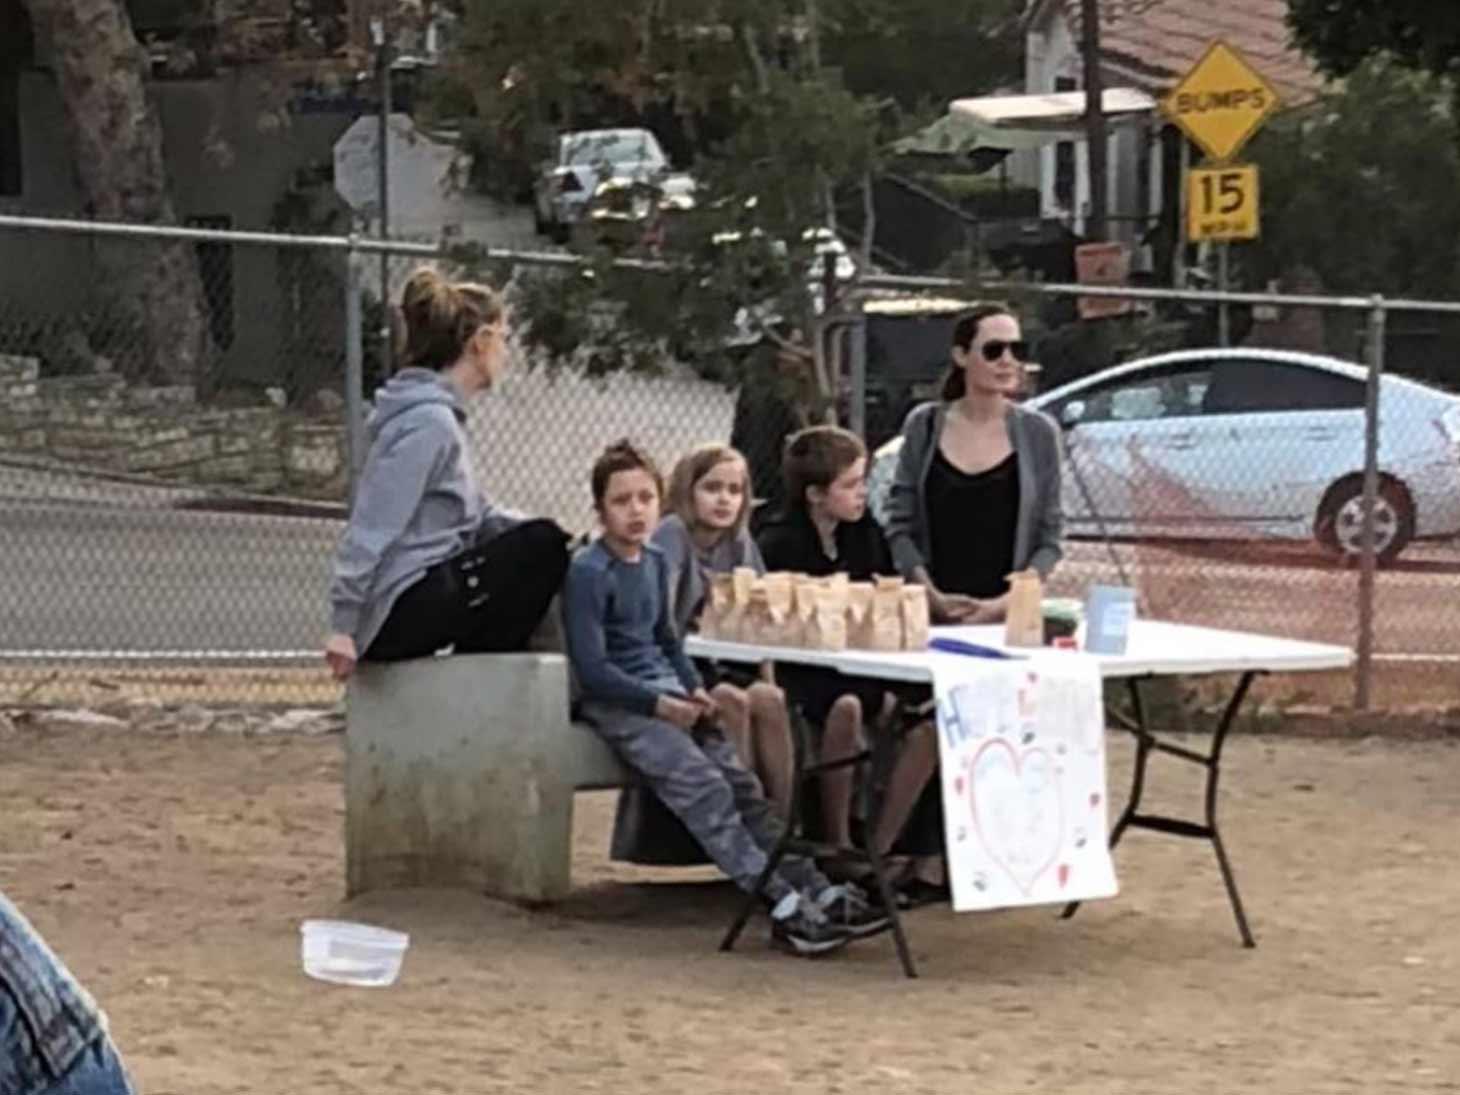 Angelina Jolie & Her Children Spotted Selling Organic Dog Treats in the Park